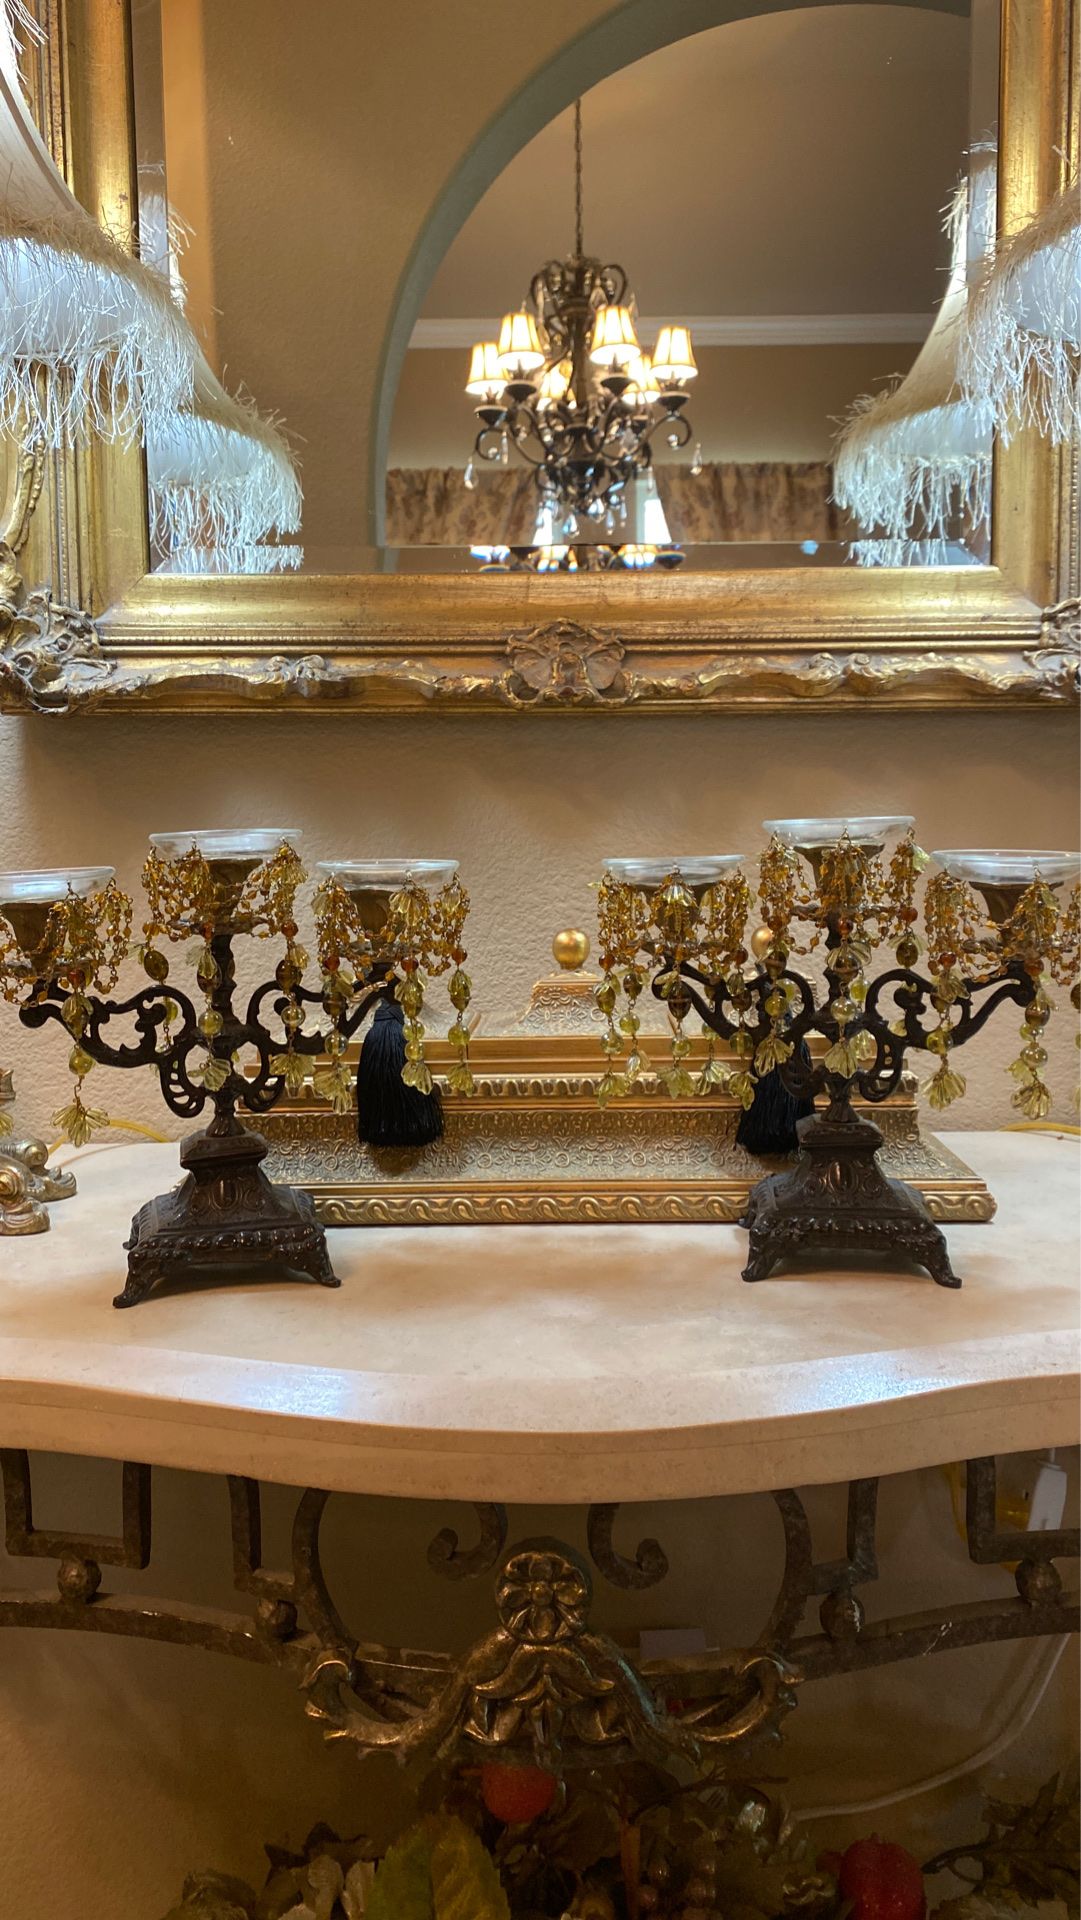 Two antique candelabras